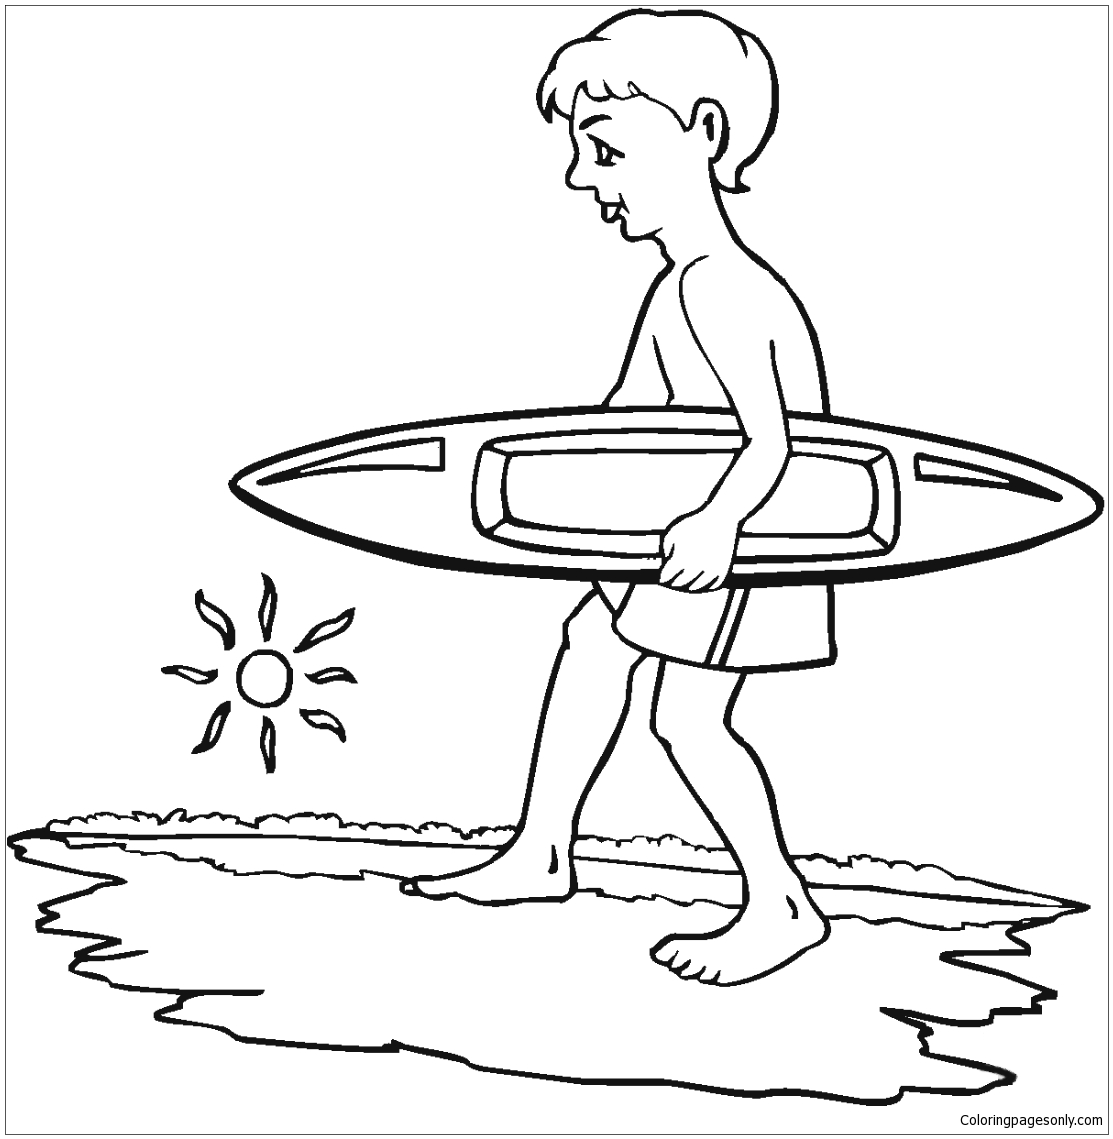 Boy Go Surfing Coloring Pages - Free Printable Coloring Pages